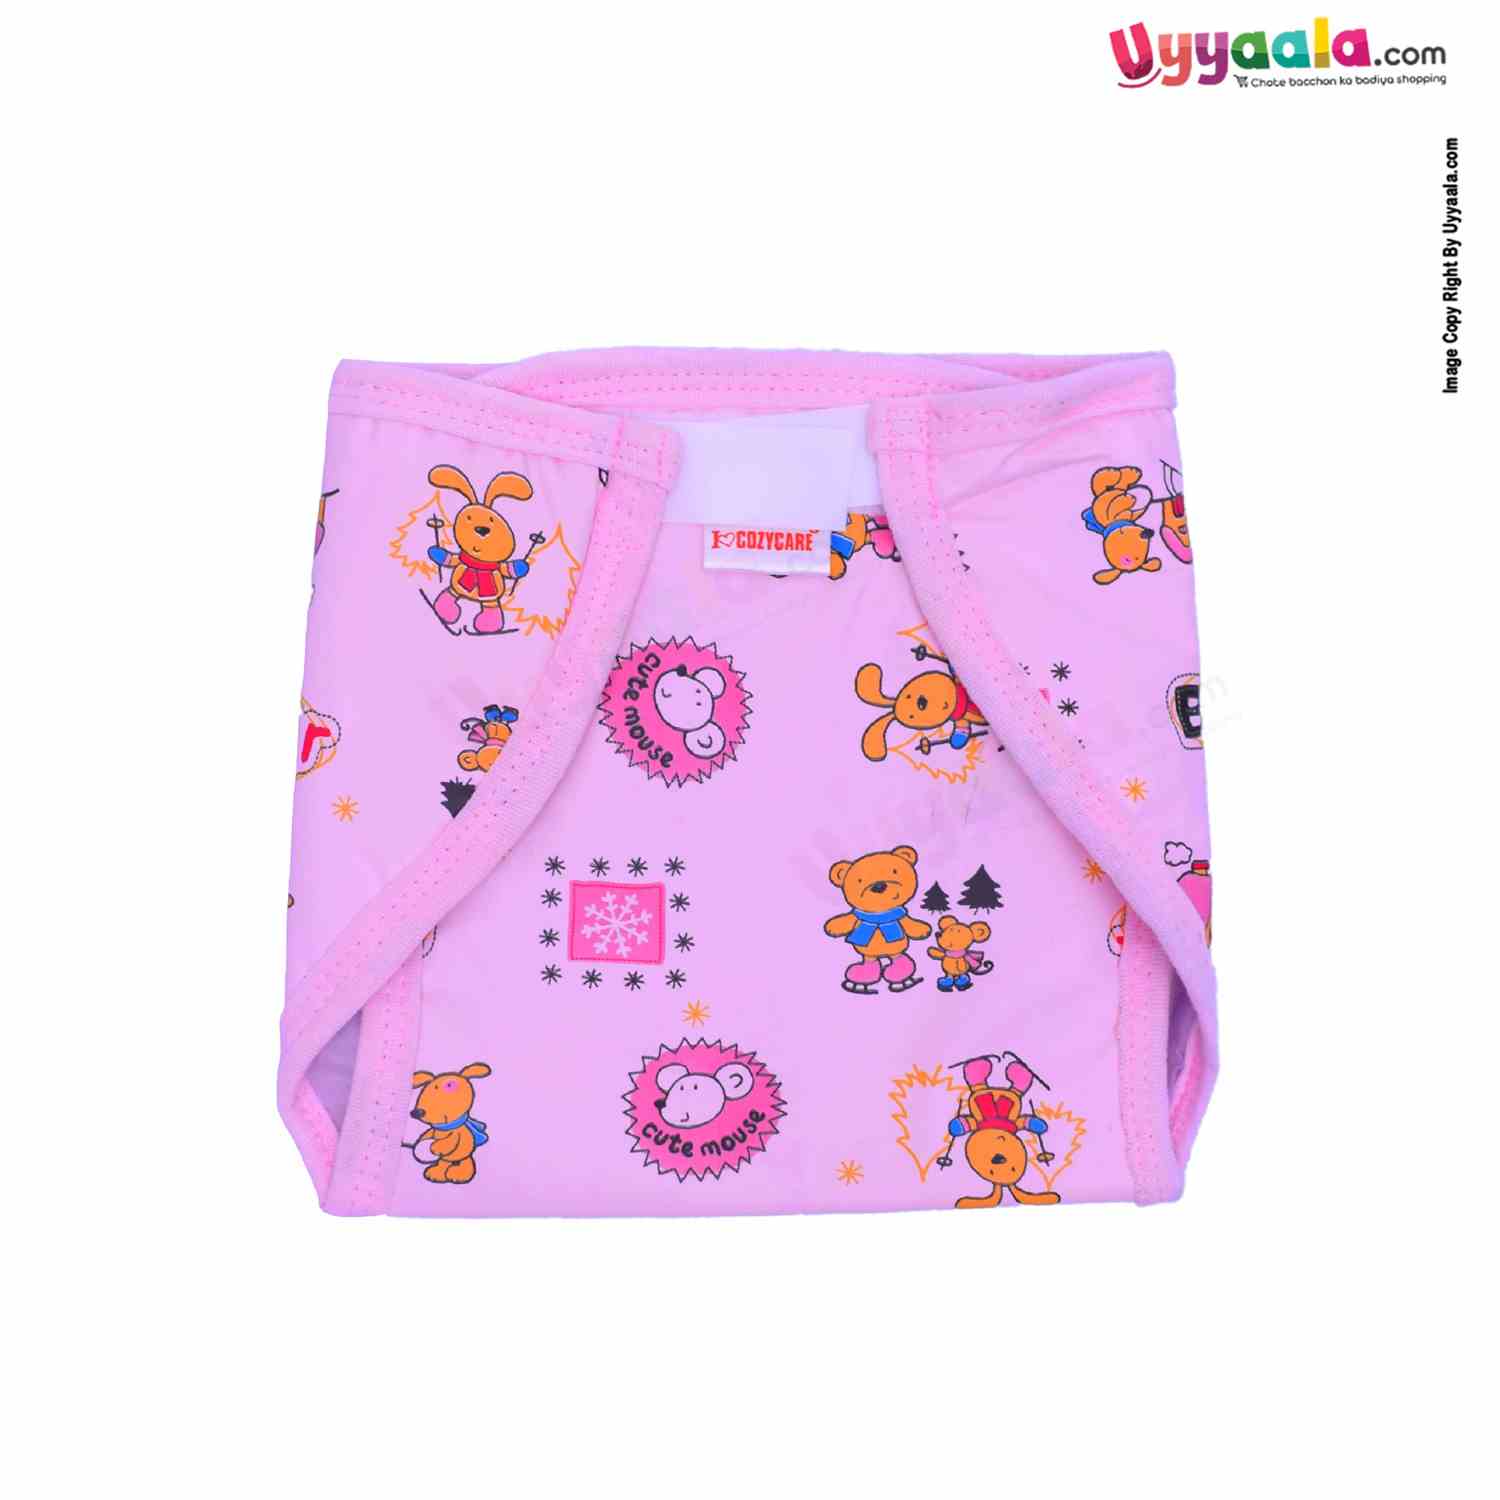 COZYCARE Washable Diapers Plastic ,Velcro Bear Print Pink, Blue & Yellow without Pads-3P Set (L)